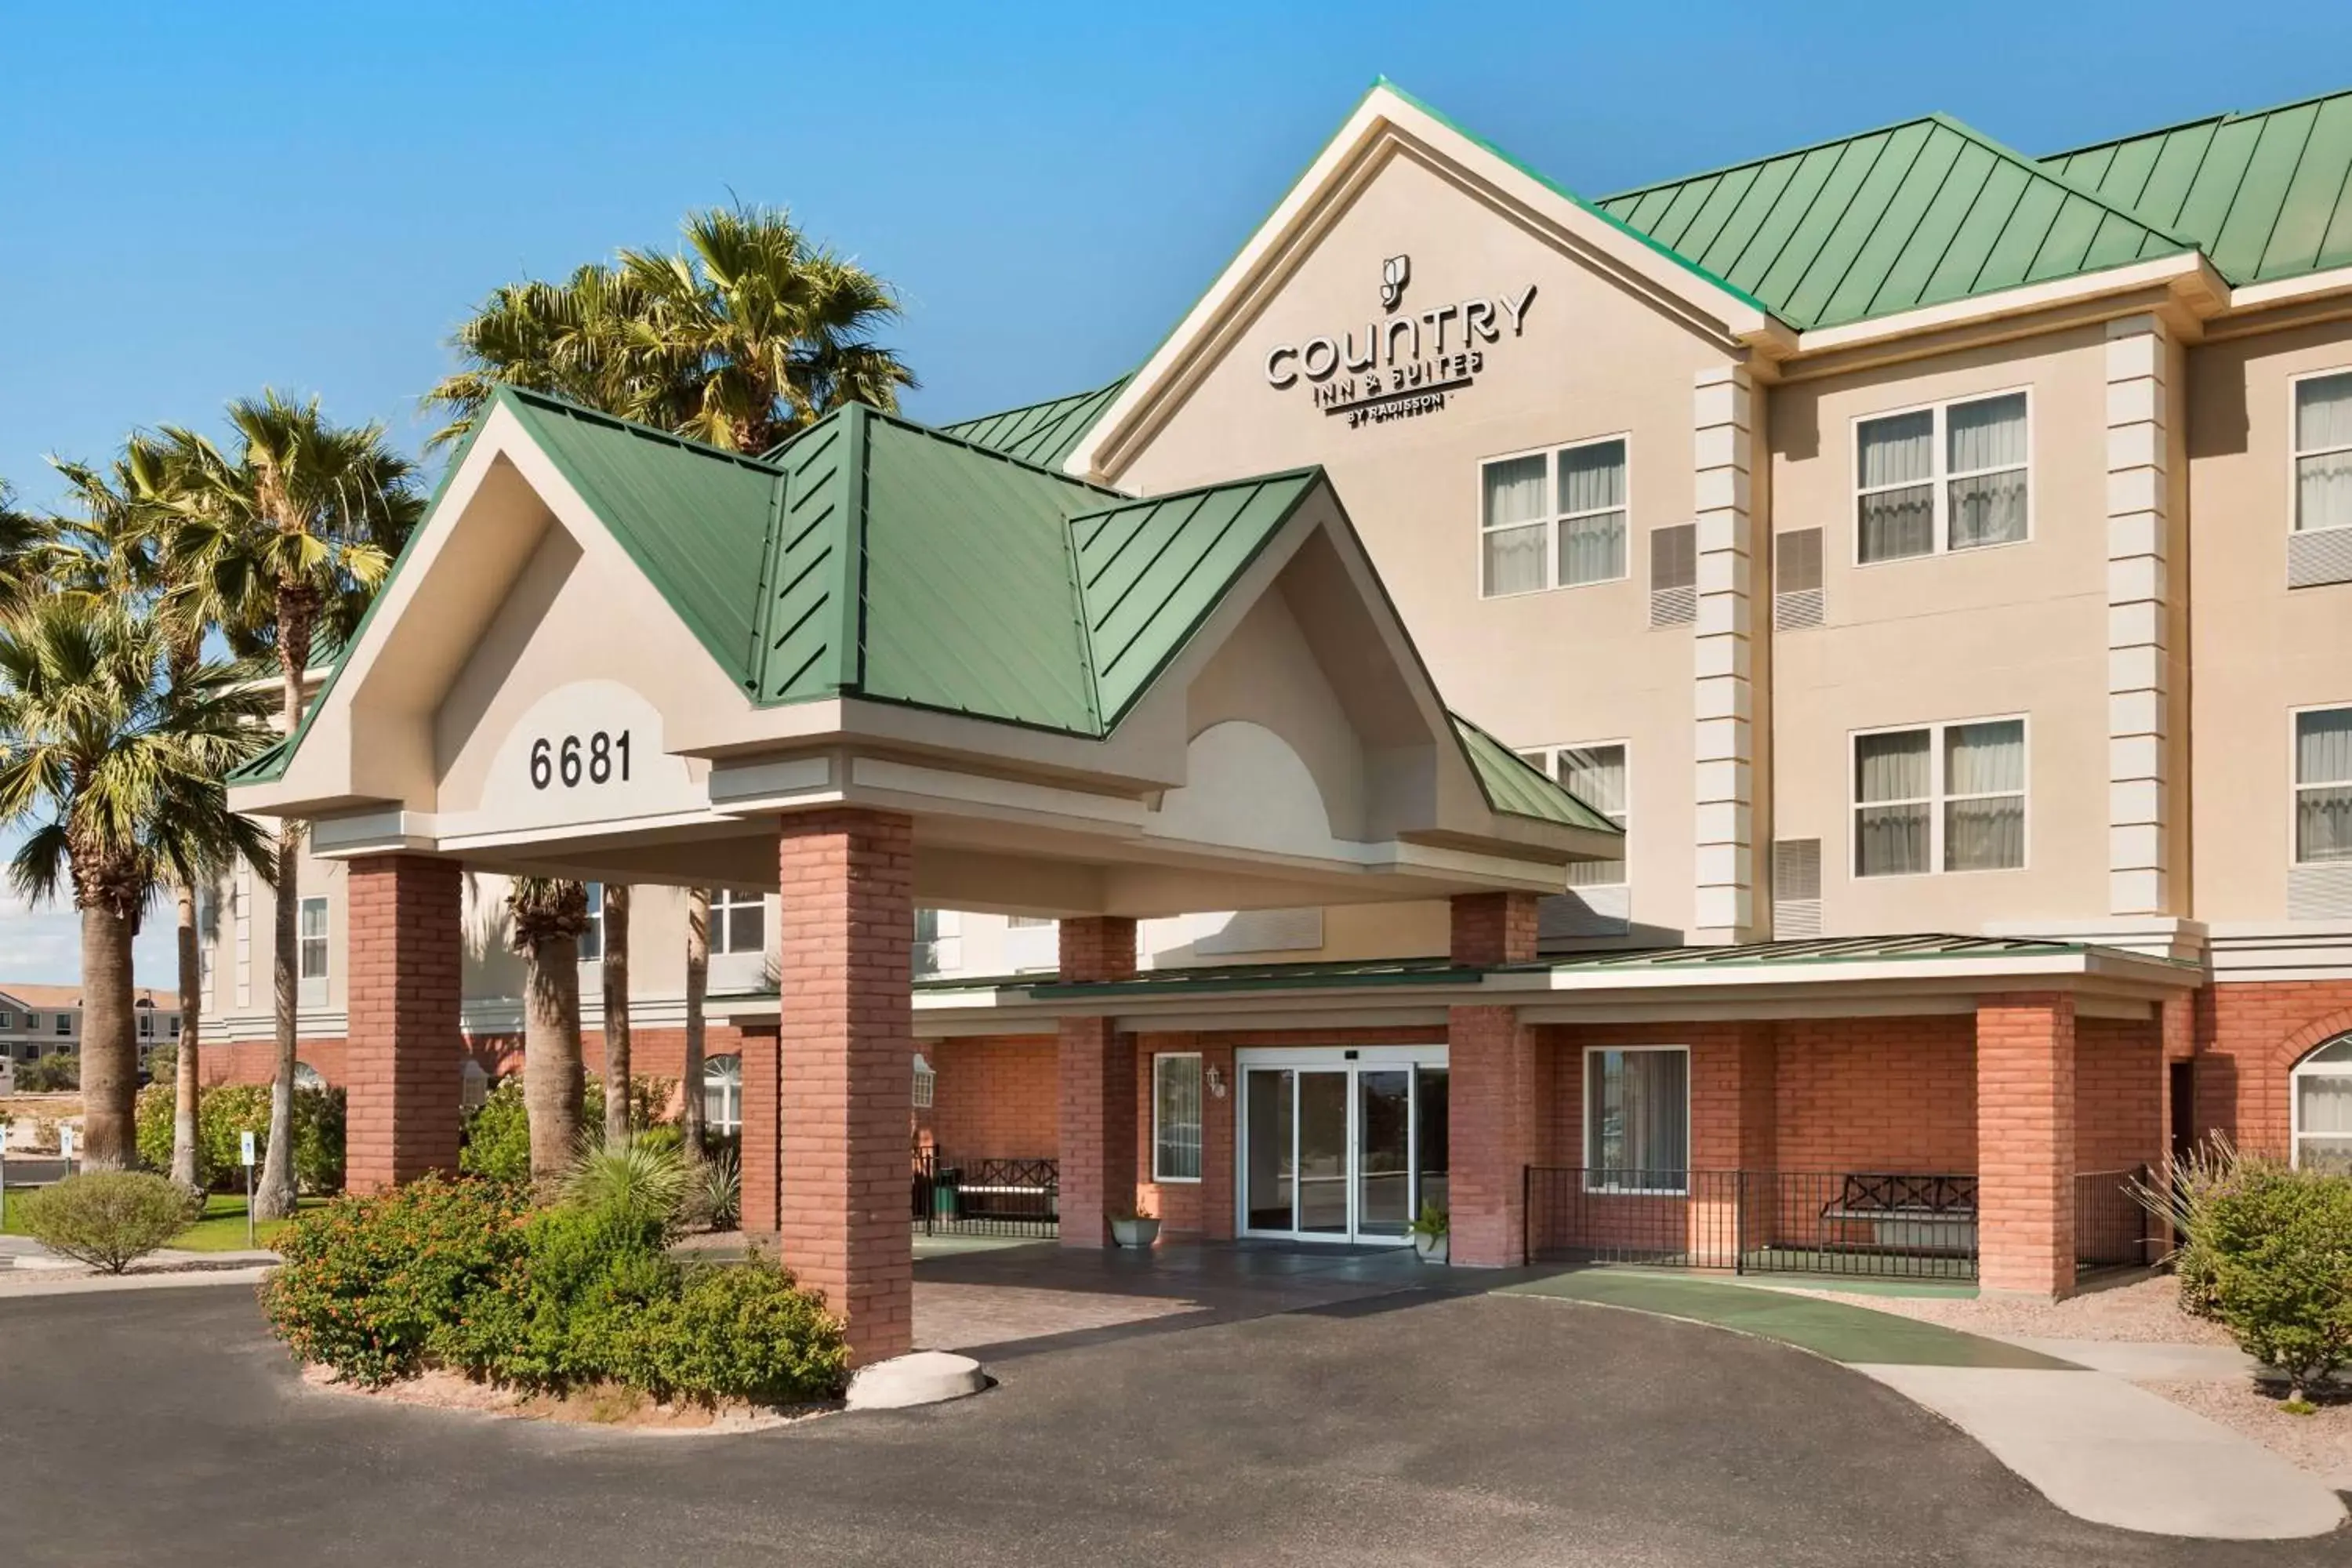 Property building in Country Inn & Suites by Radisson, Tucson Airport, AZ